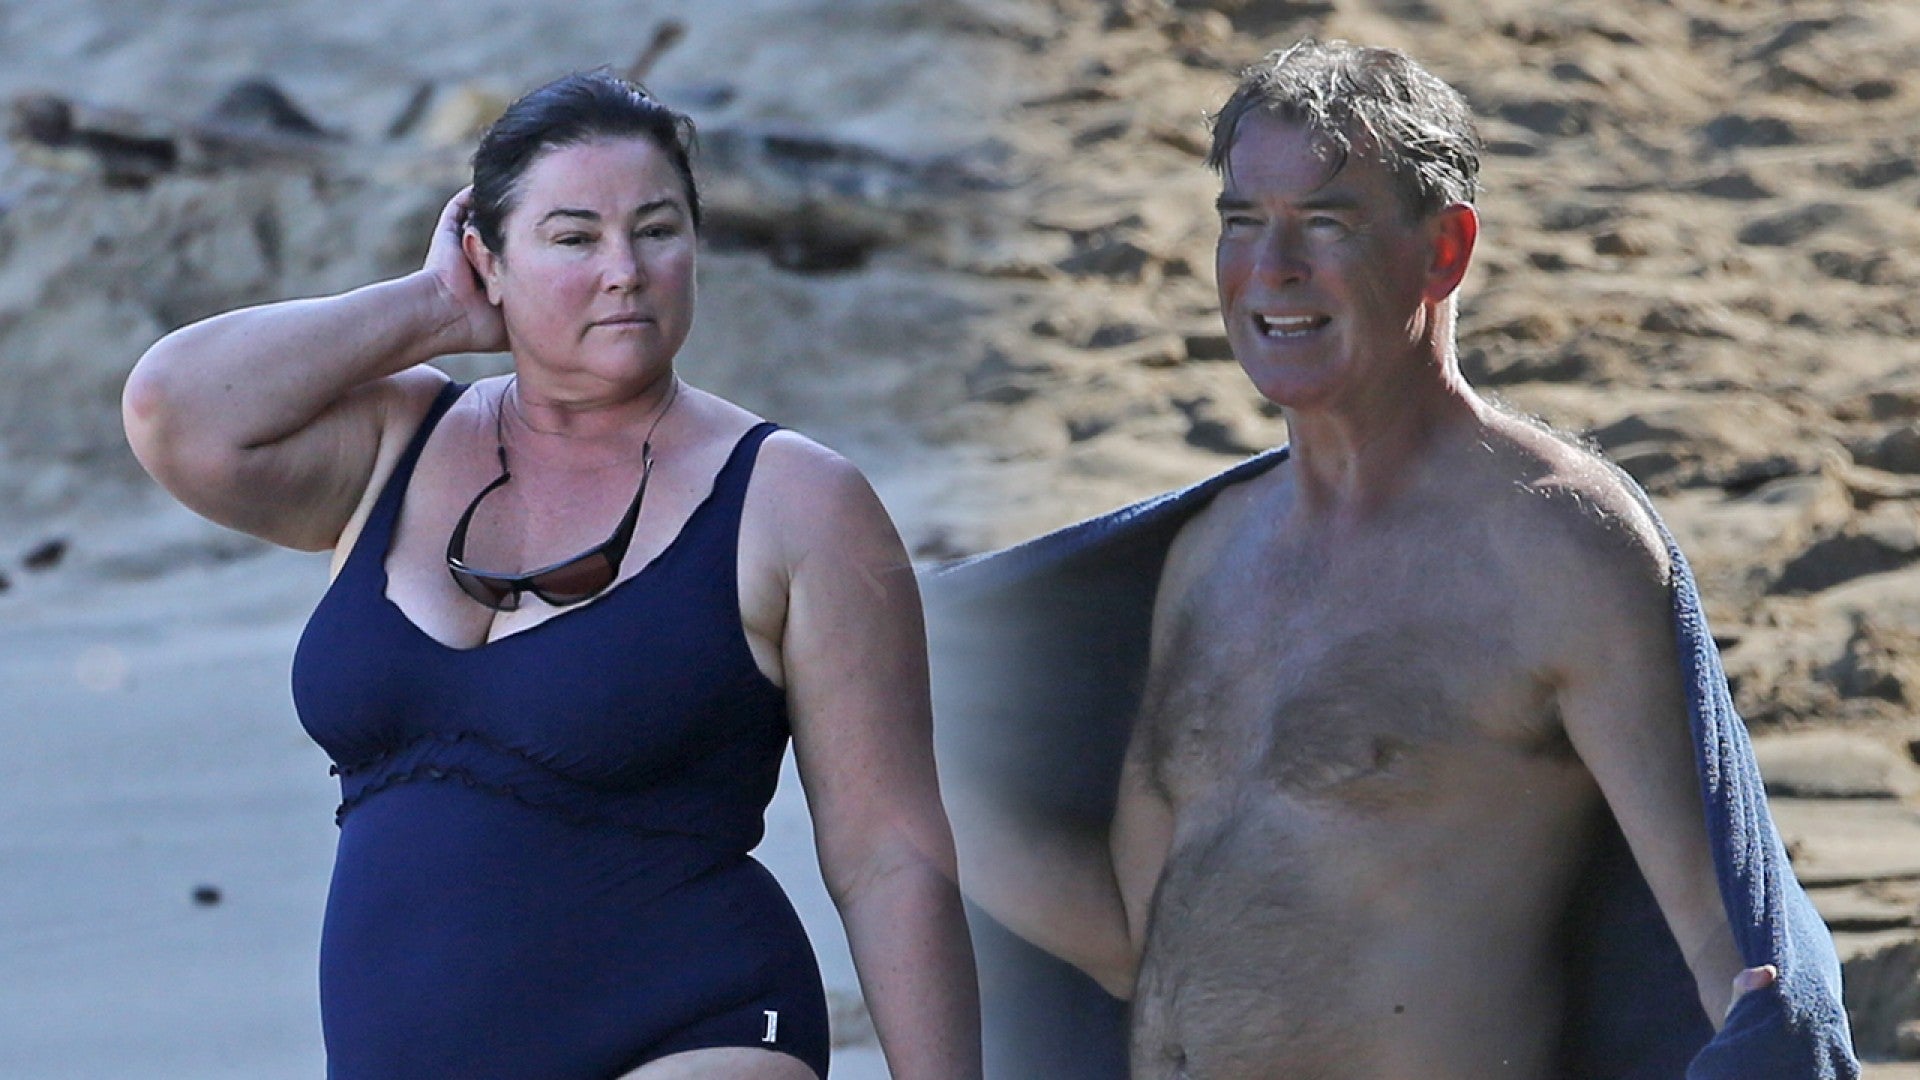 Pierce Brosnan Goes Shirtless During Hawaiian Beach Day With Wife Keely